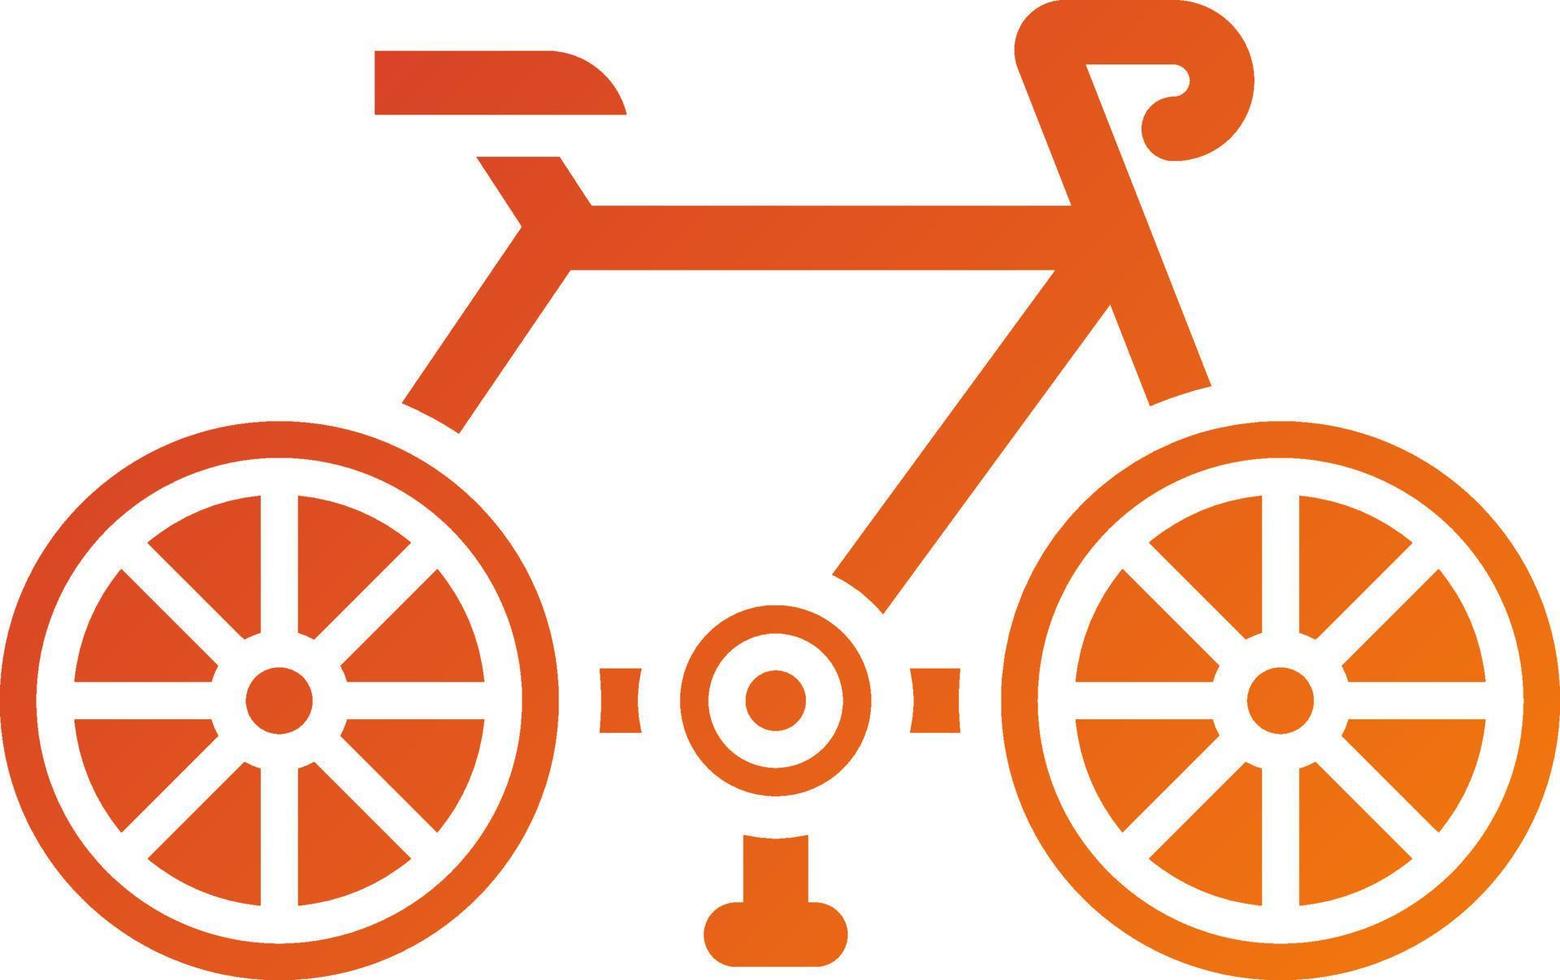 Bicycle Icon Style vector